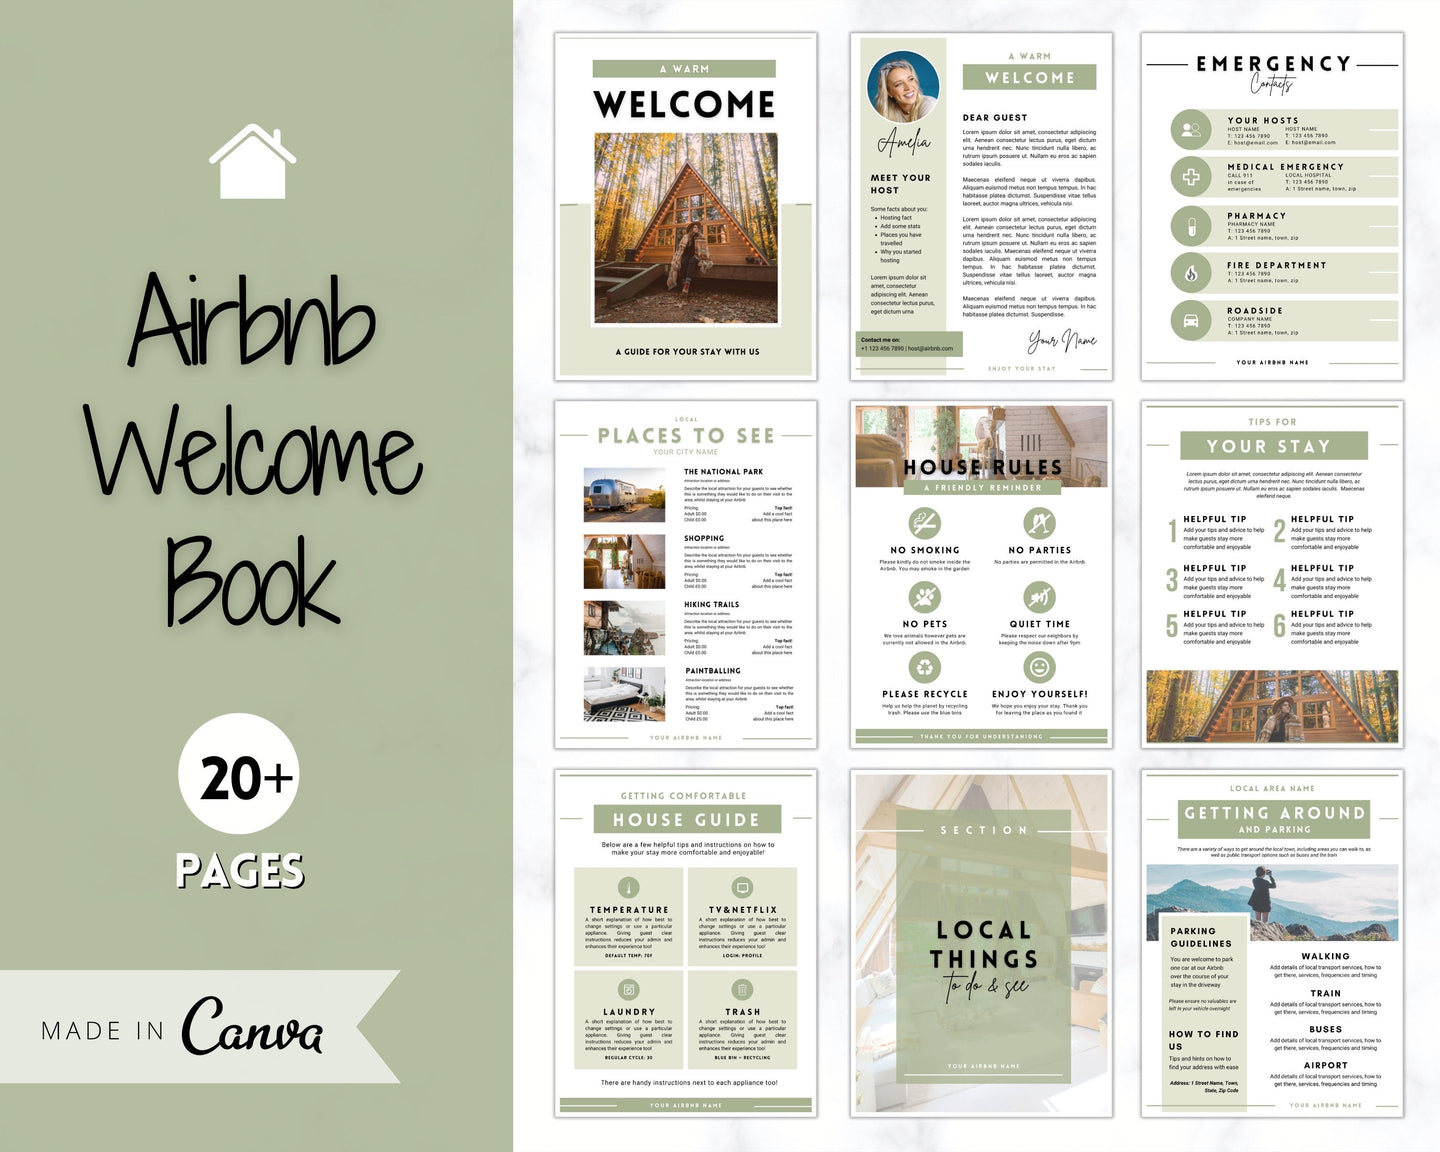 Welcome Book Template, Airbnb Welcome Guide, Editable Canva Air bnb House manual, Superhost eBook, Host signs, Signage, VRBO Vacation Rental | Green